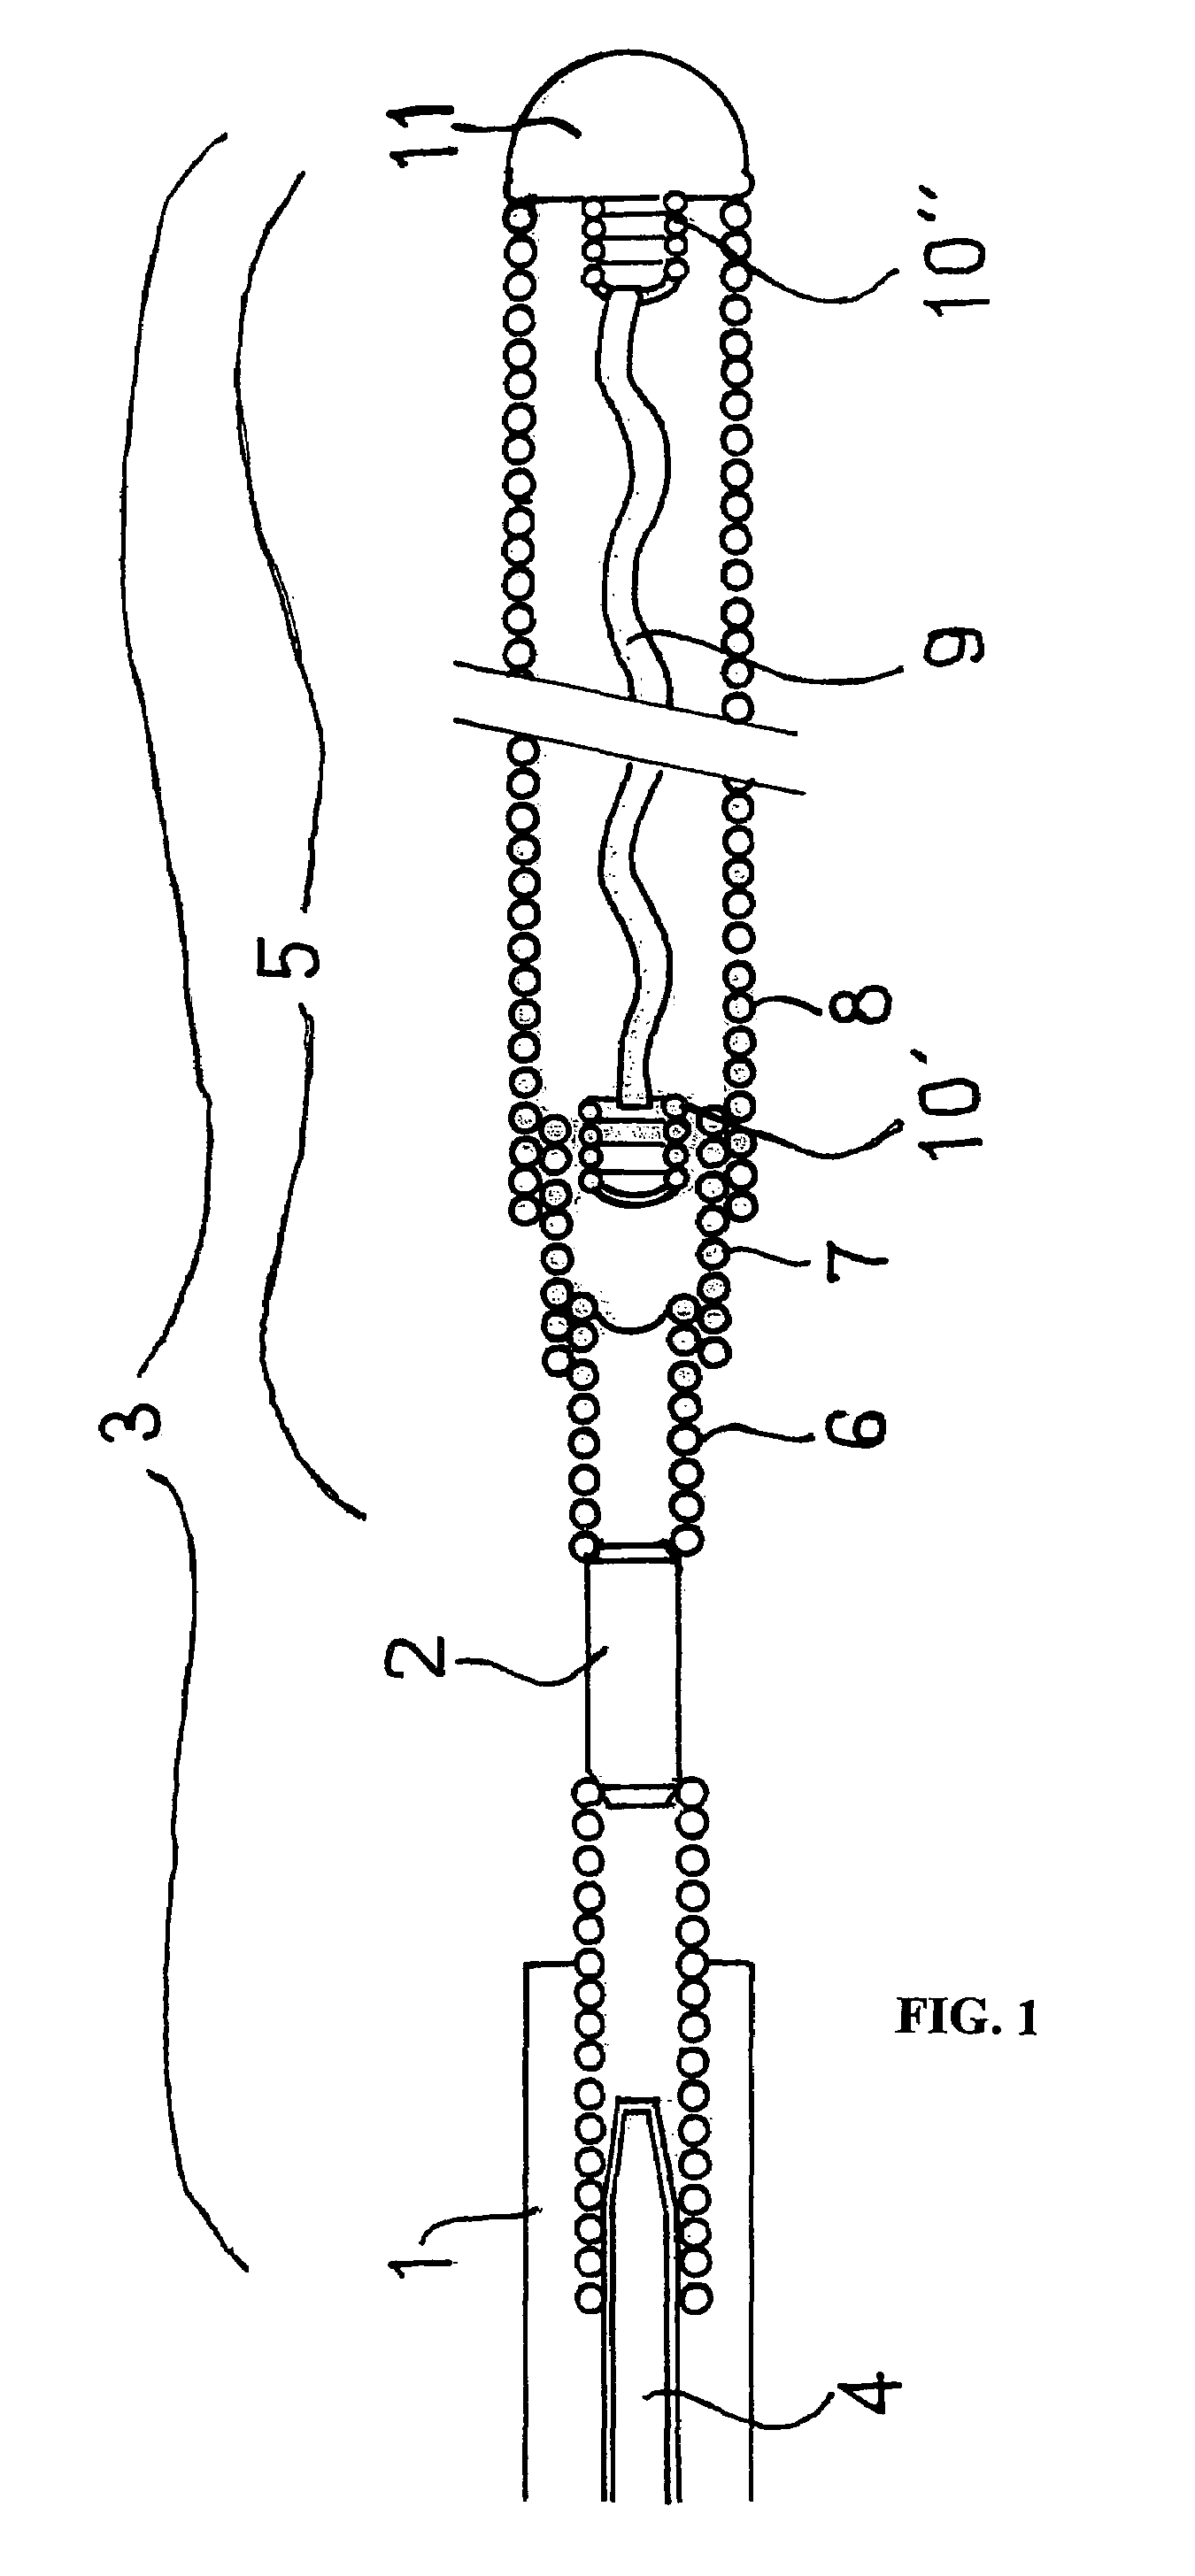 Device for implanting occlusion spirals